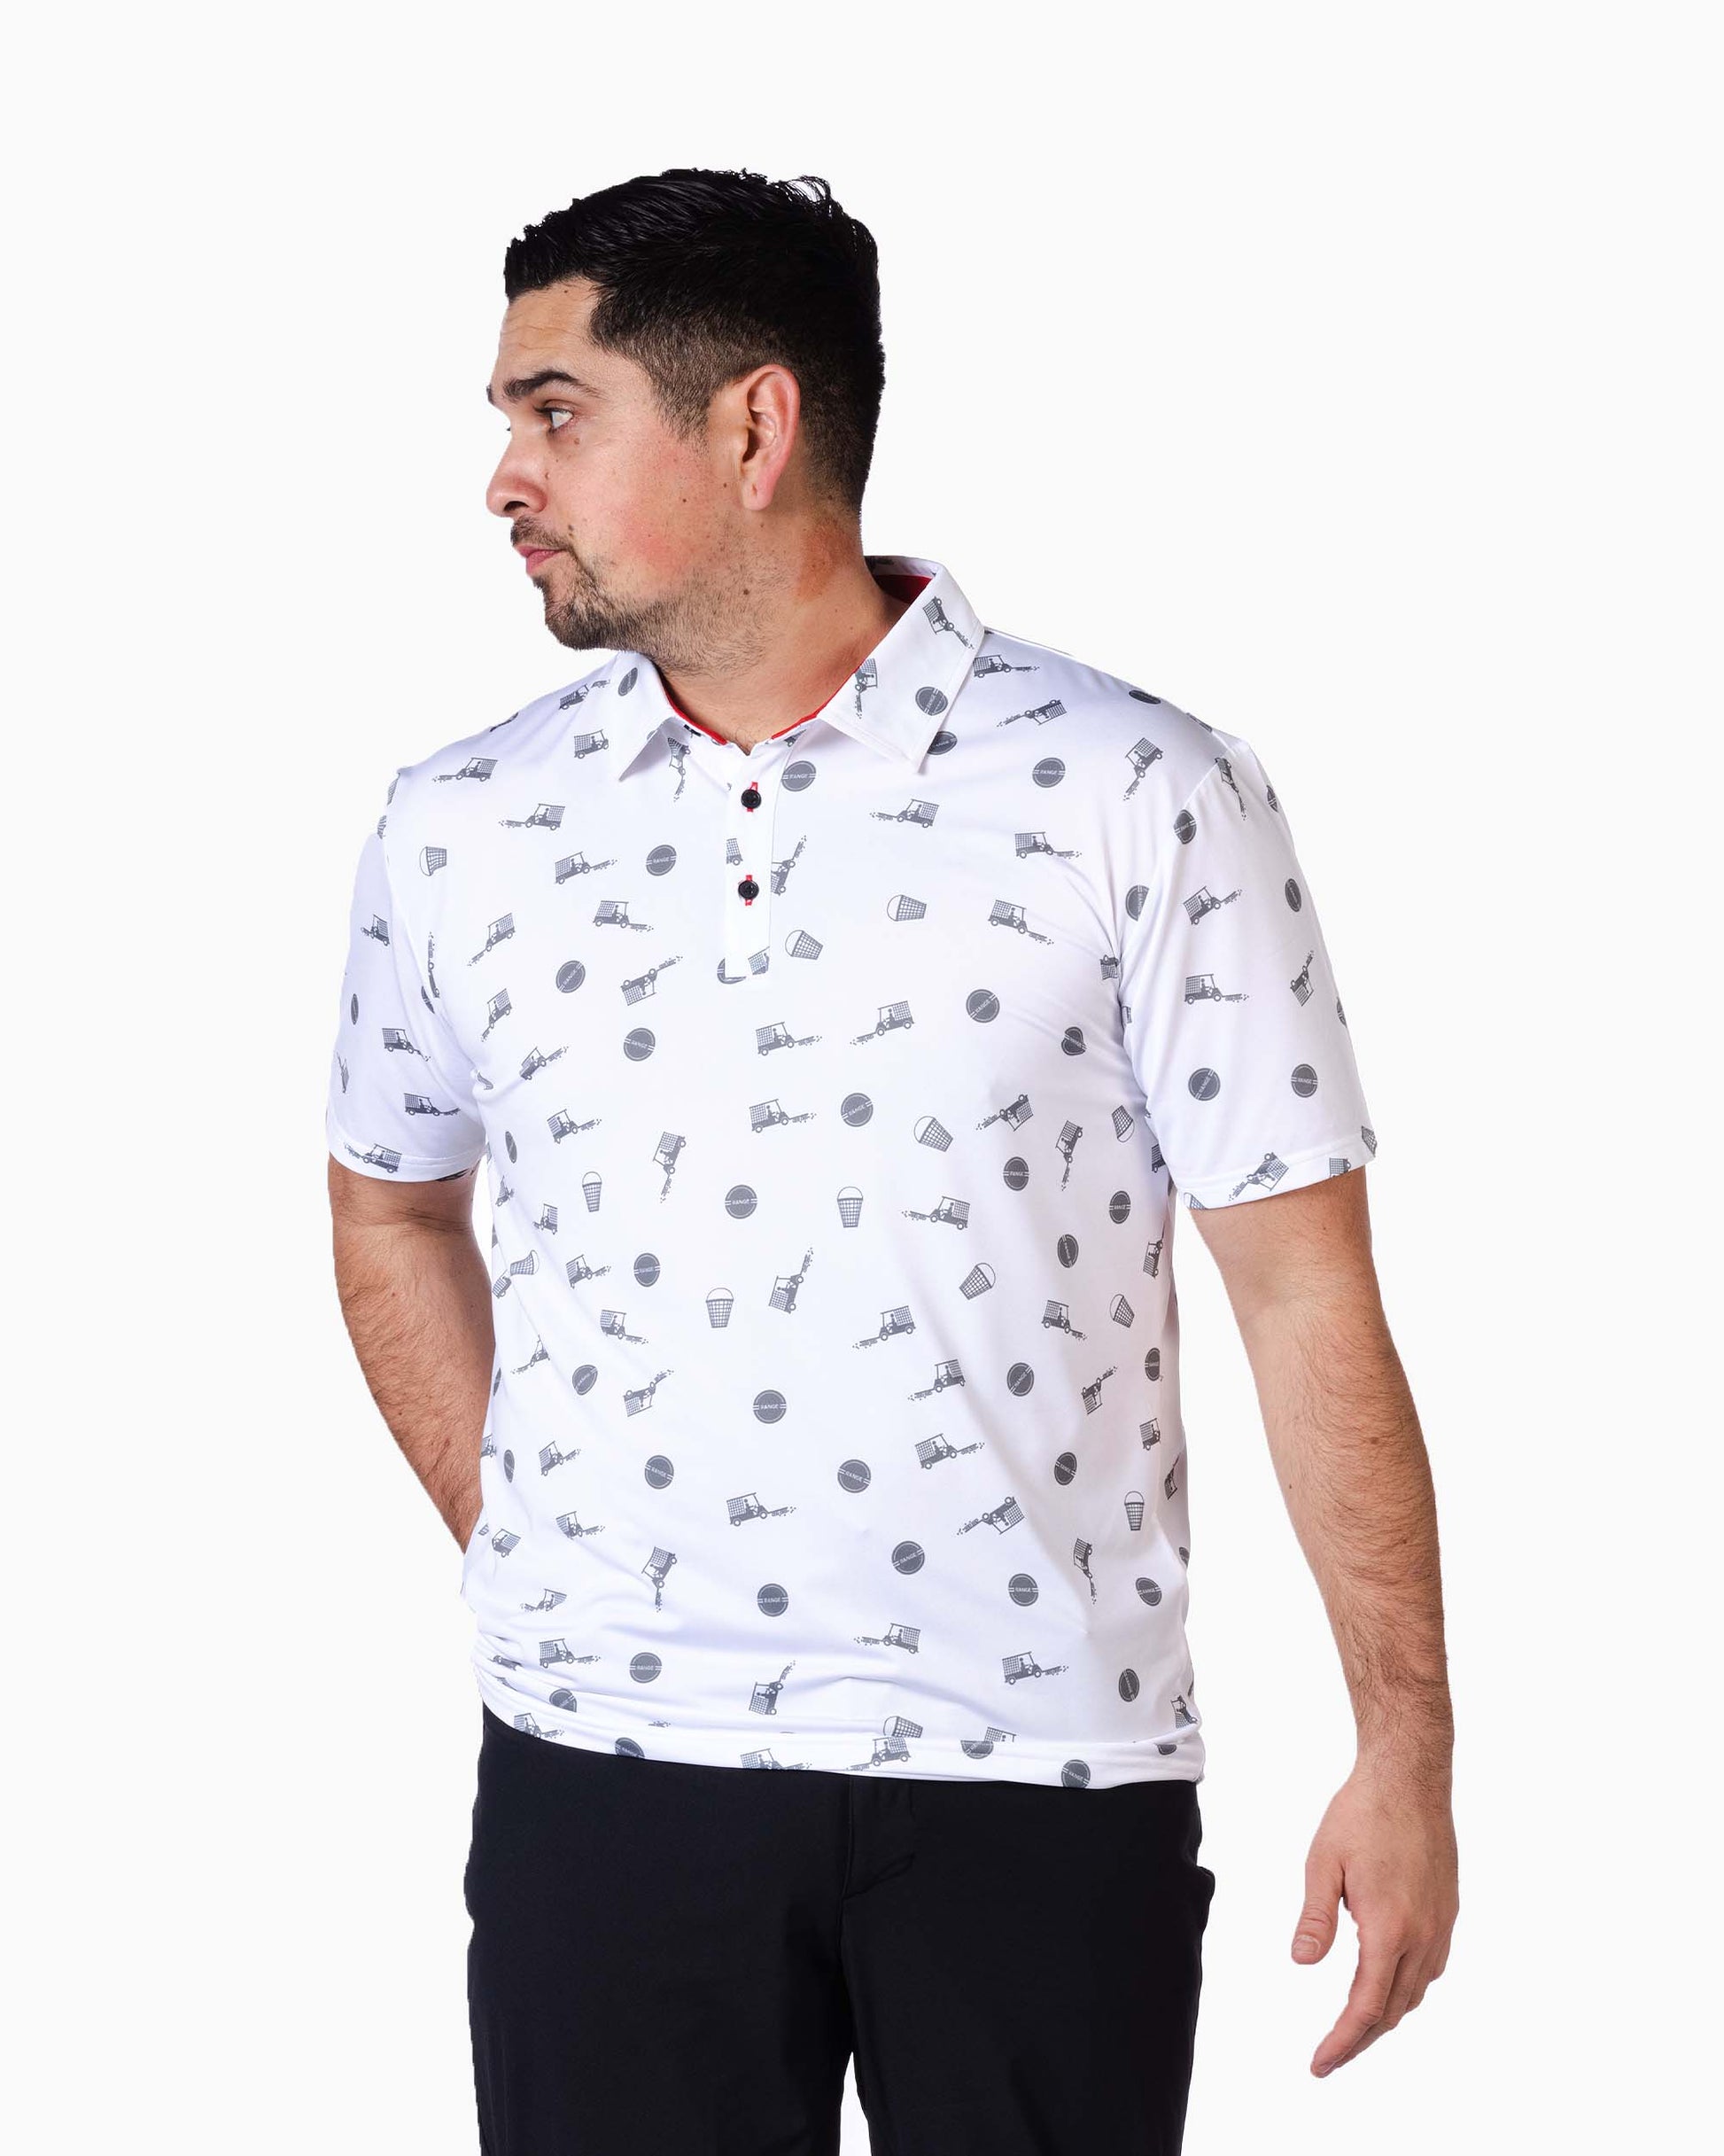 man wearing white range polo with scattered golf icons 